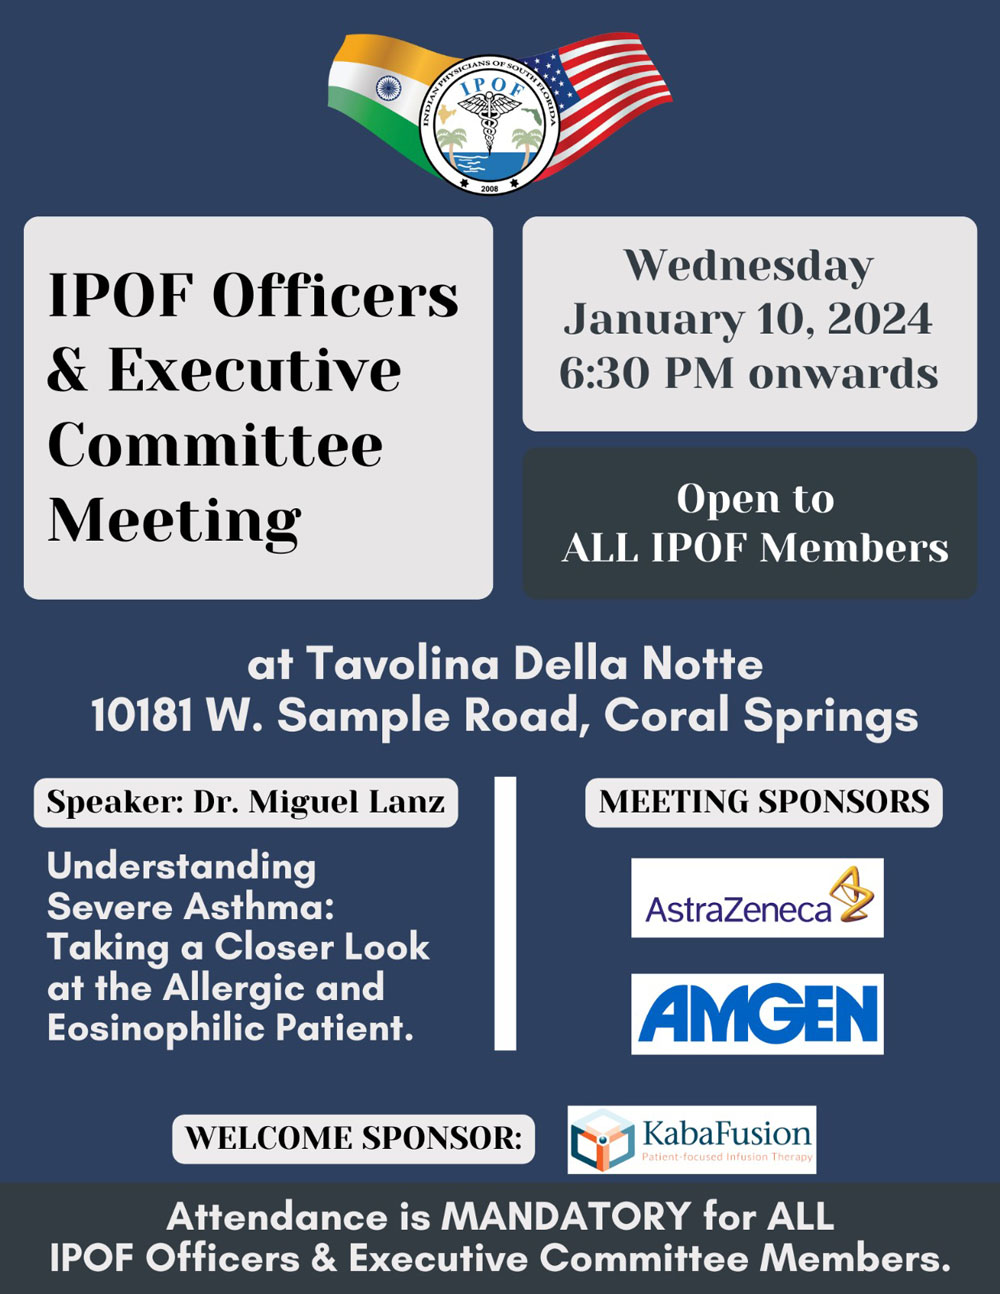 IPOF Officers & Executive Committee Meeting